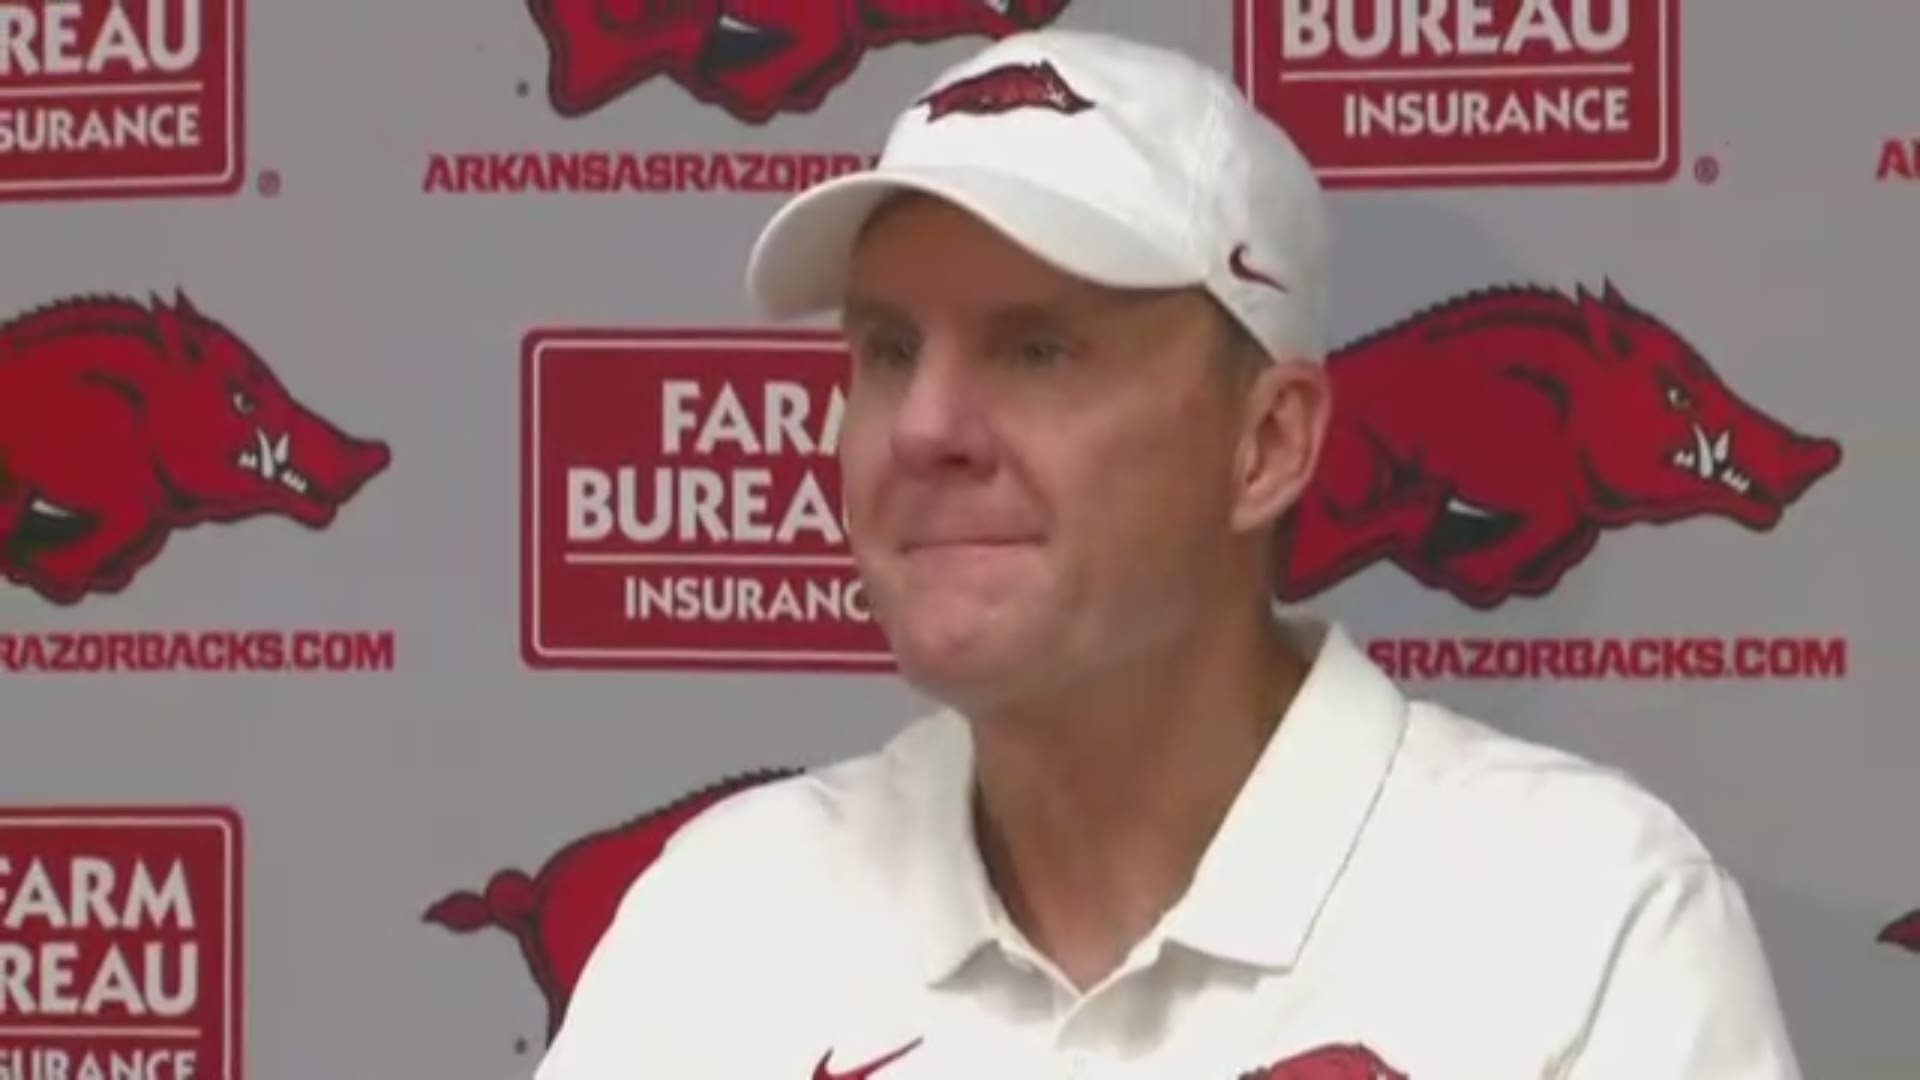 The Arkansas Razorbacks lost their 2nd game of the season to Ole Miss 31-17. Coach Chad Morris said he was 'extremely disappointed' with the loss.